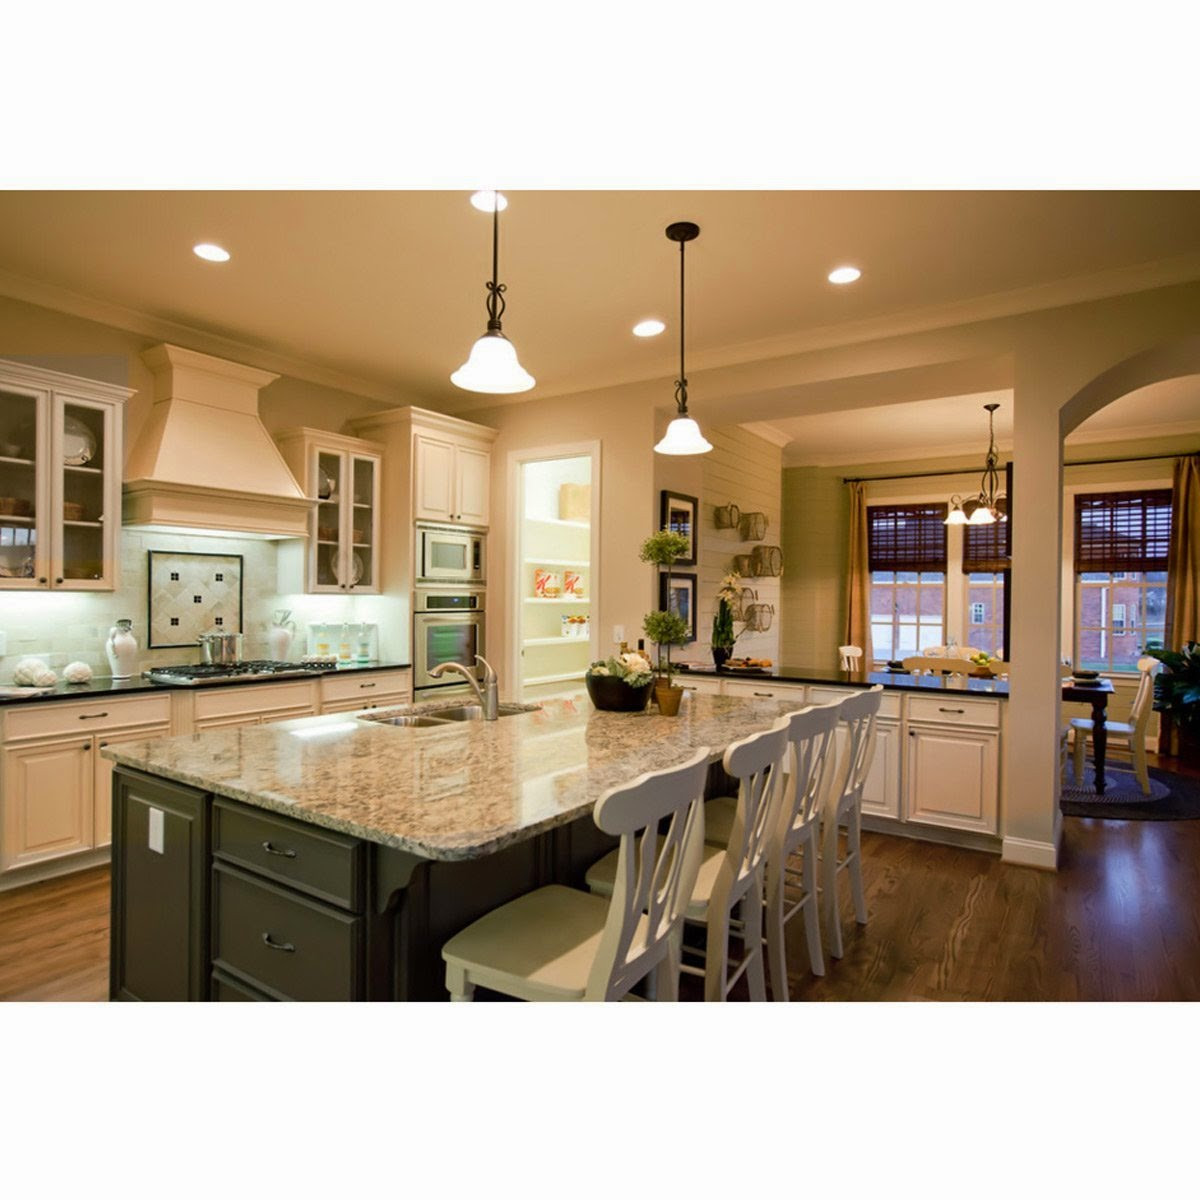 Recessed Lighting In Kitchens
 Electric Work Recessed Lights